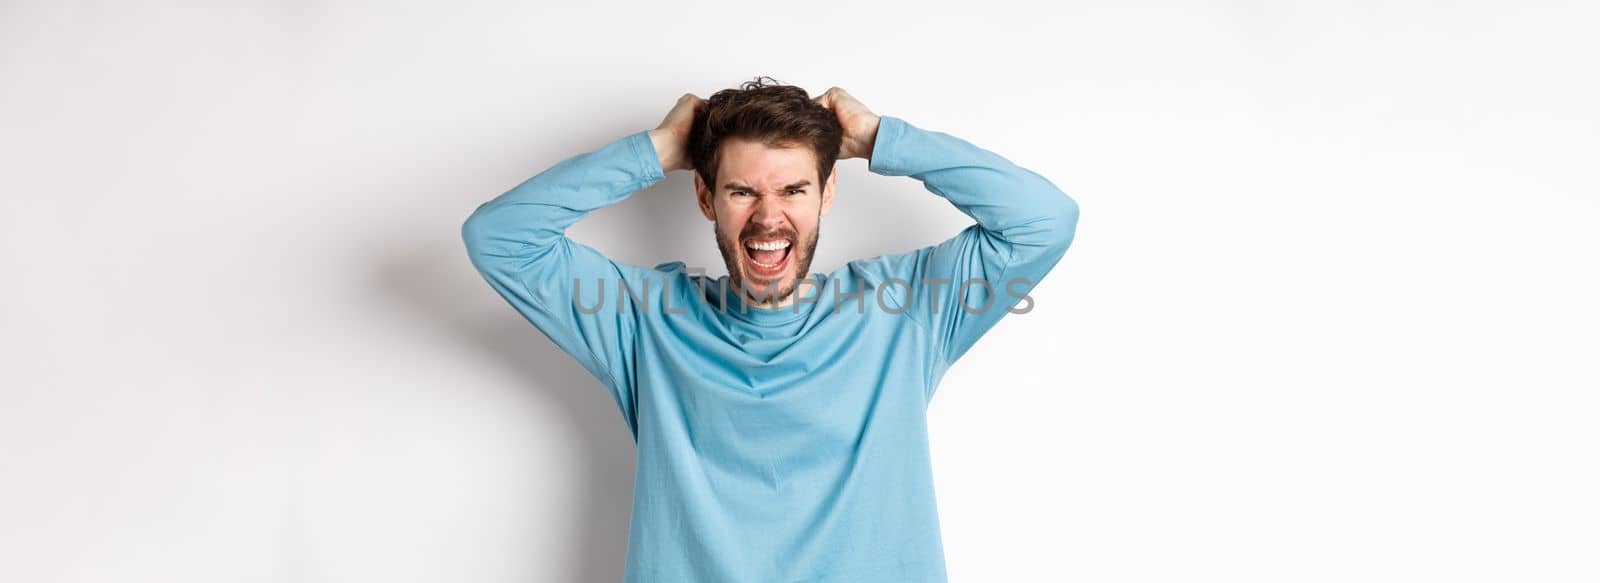 Mad young man pull hair oyt of head and screaming angry, shouting frustrated, standing hateful against white background.